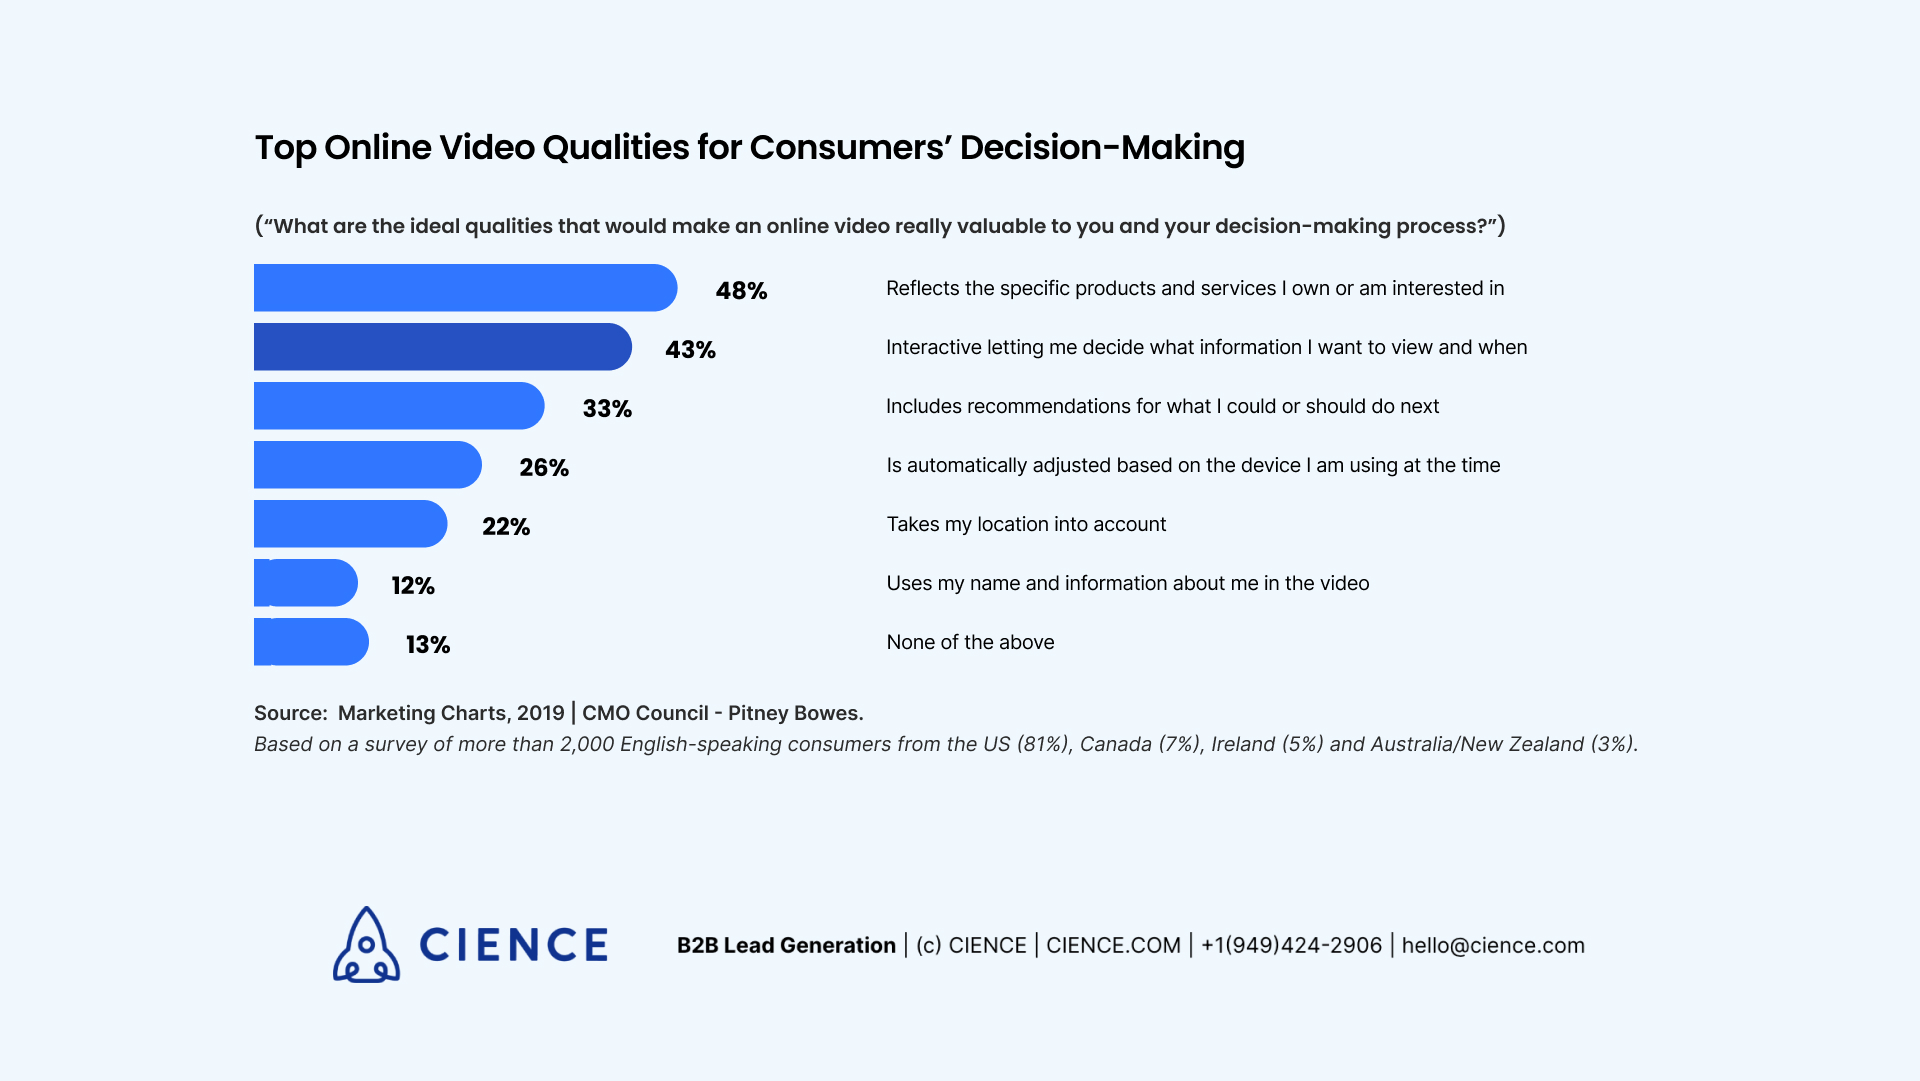 Top Online Video Qualities for Consumers' Decision-Making